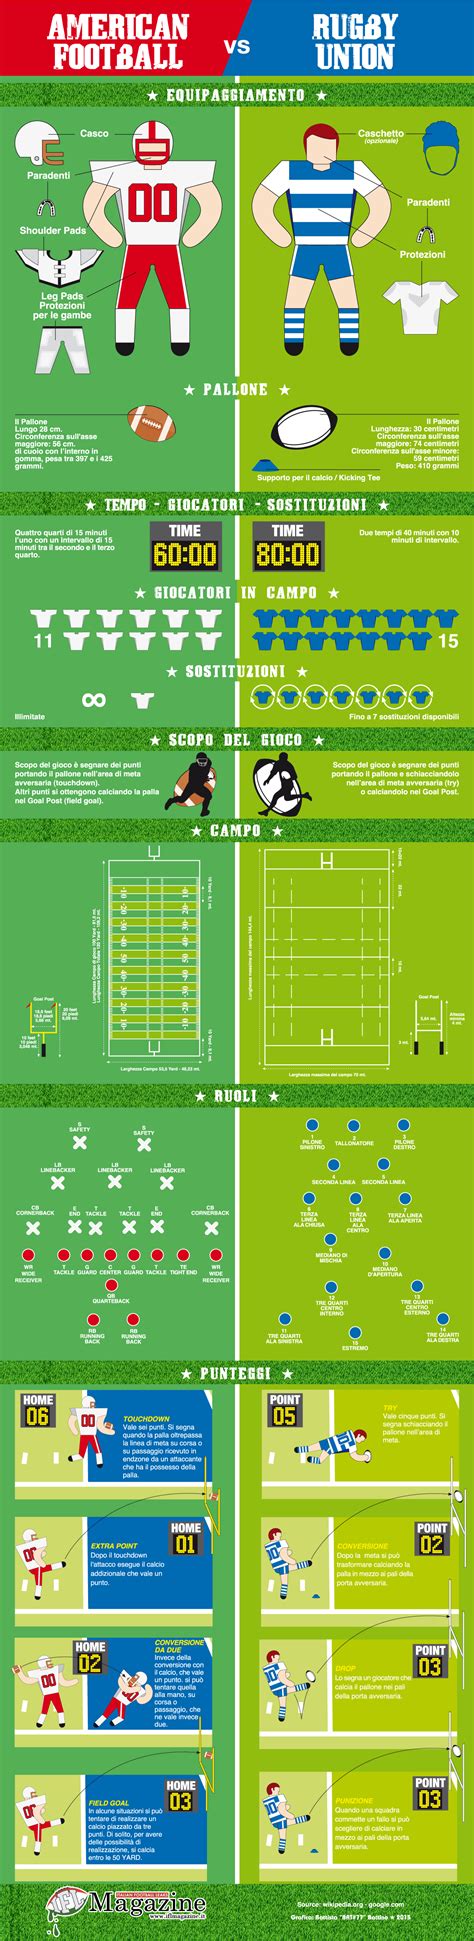 Infografica: American Football vs Rugby Union - IFL Magazine | Rugby vs ...